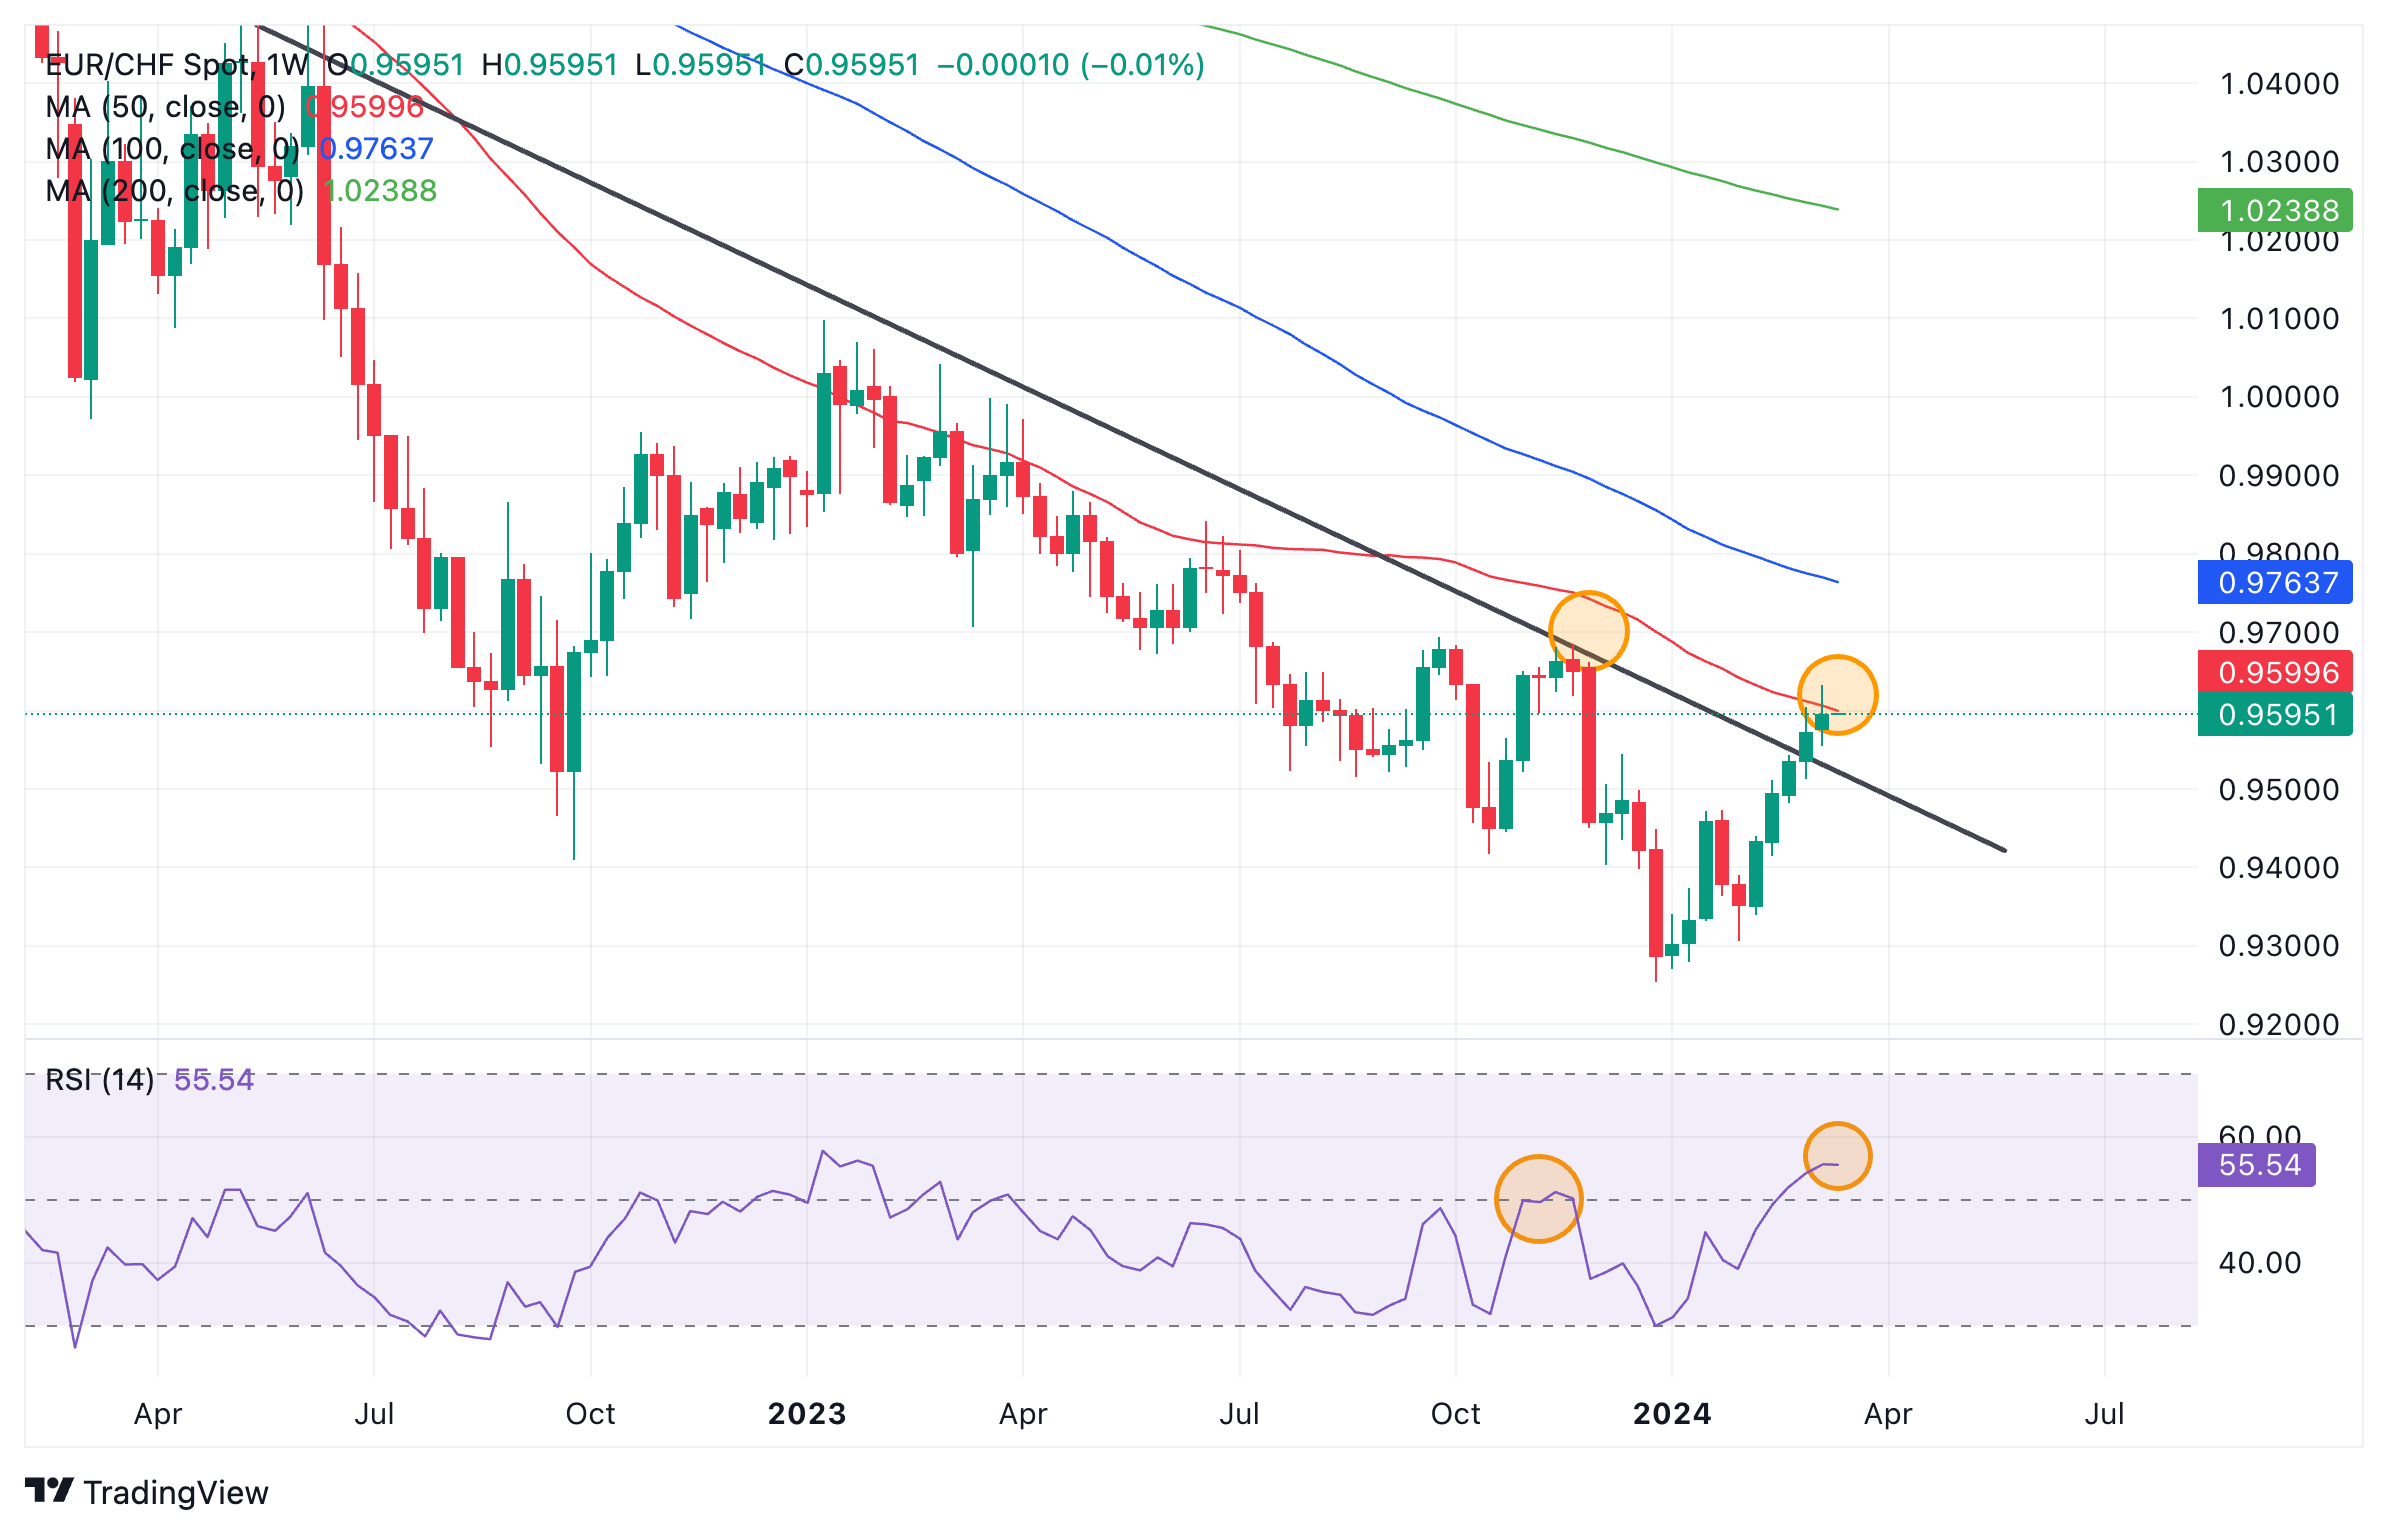 EUR/CHF Price Analysis: Pullback possible amid mixed signals